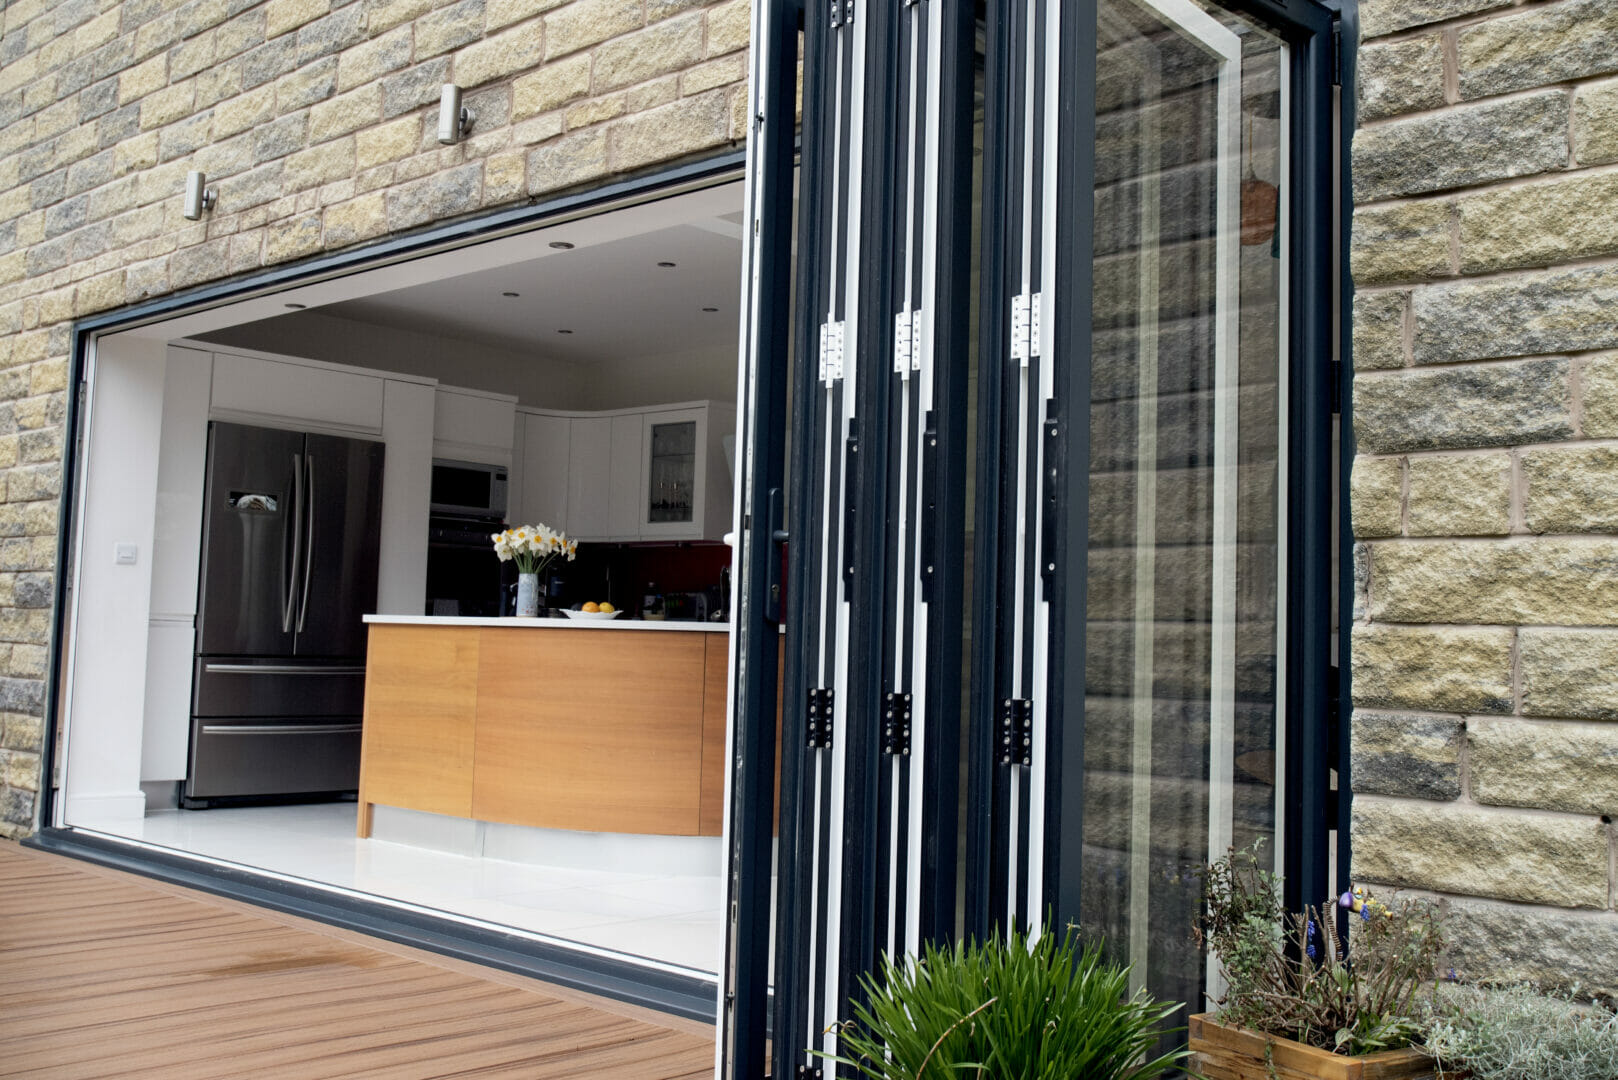 Choosing windows and doors with security in mind  @QuickSlide